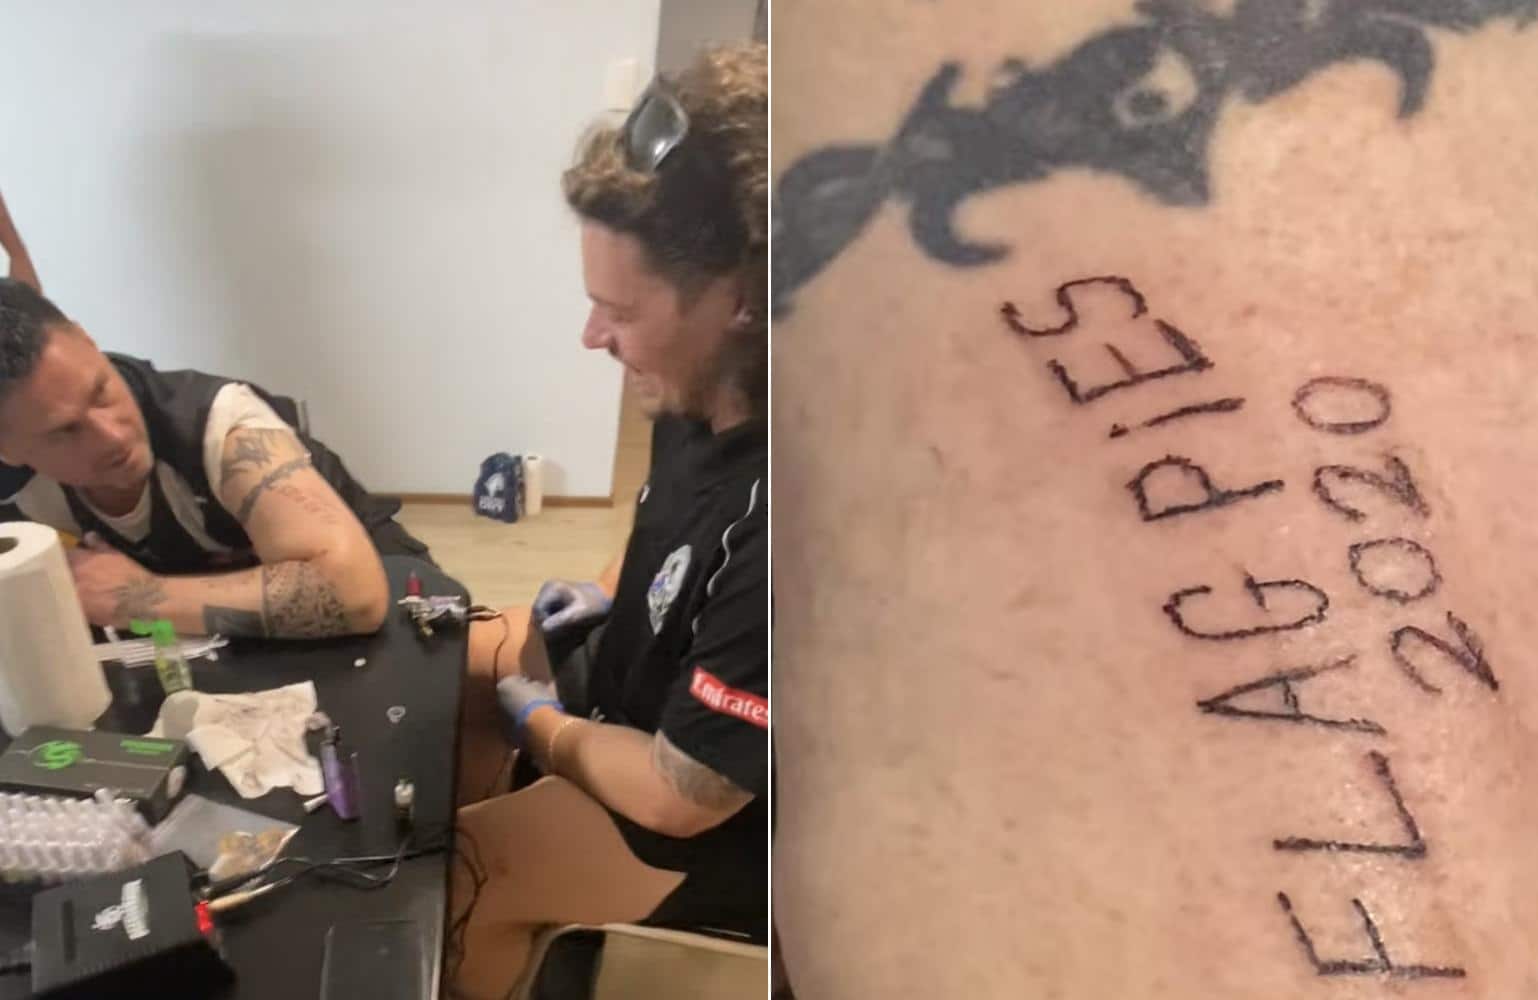 Bloke goes full Collingwood and gets the date wrong on his dad’s Flagpies tattoo